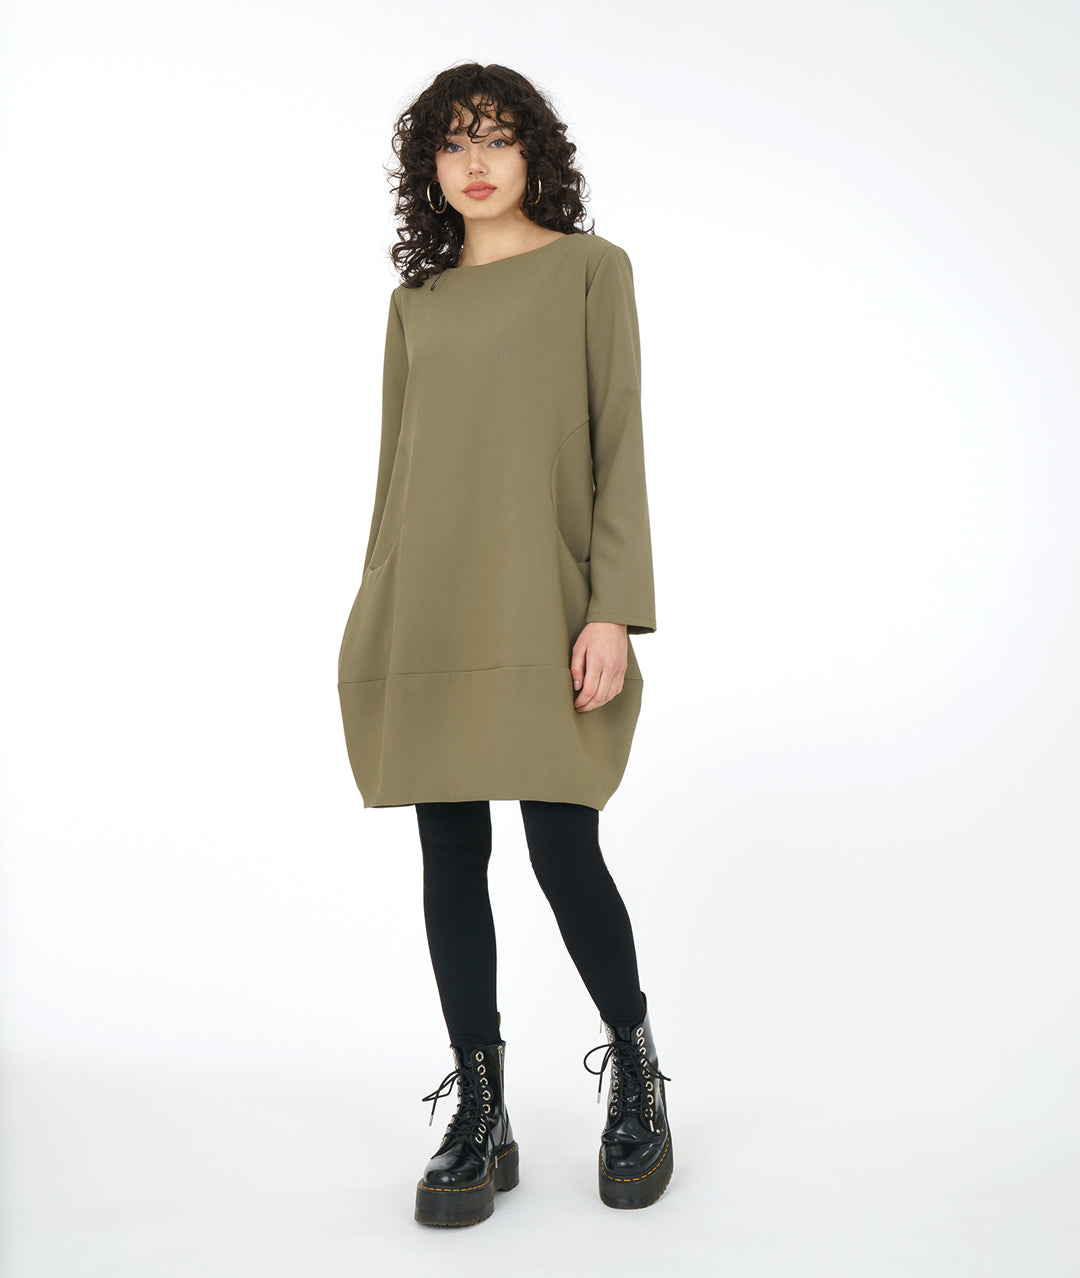 model in a sage green tunic with a wide bottom hem, 3/4 sleeves, and round seams at the waist with set in pockets